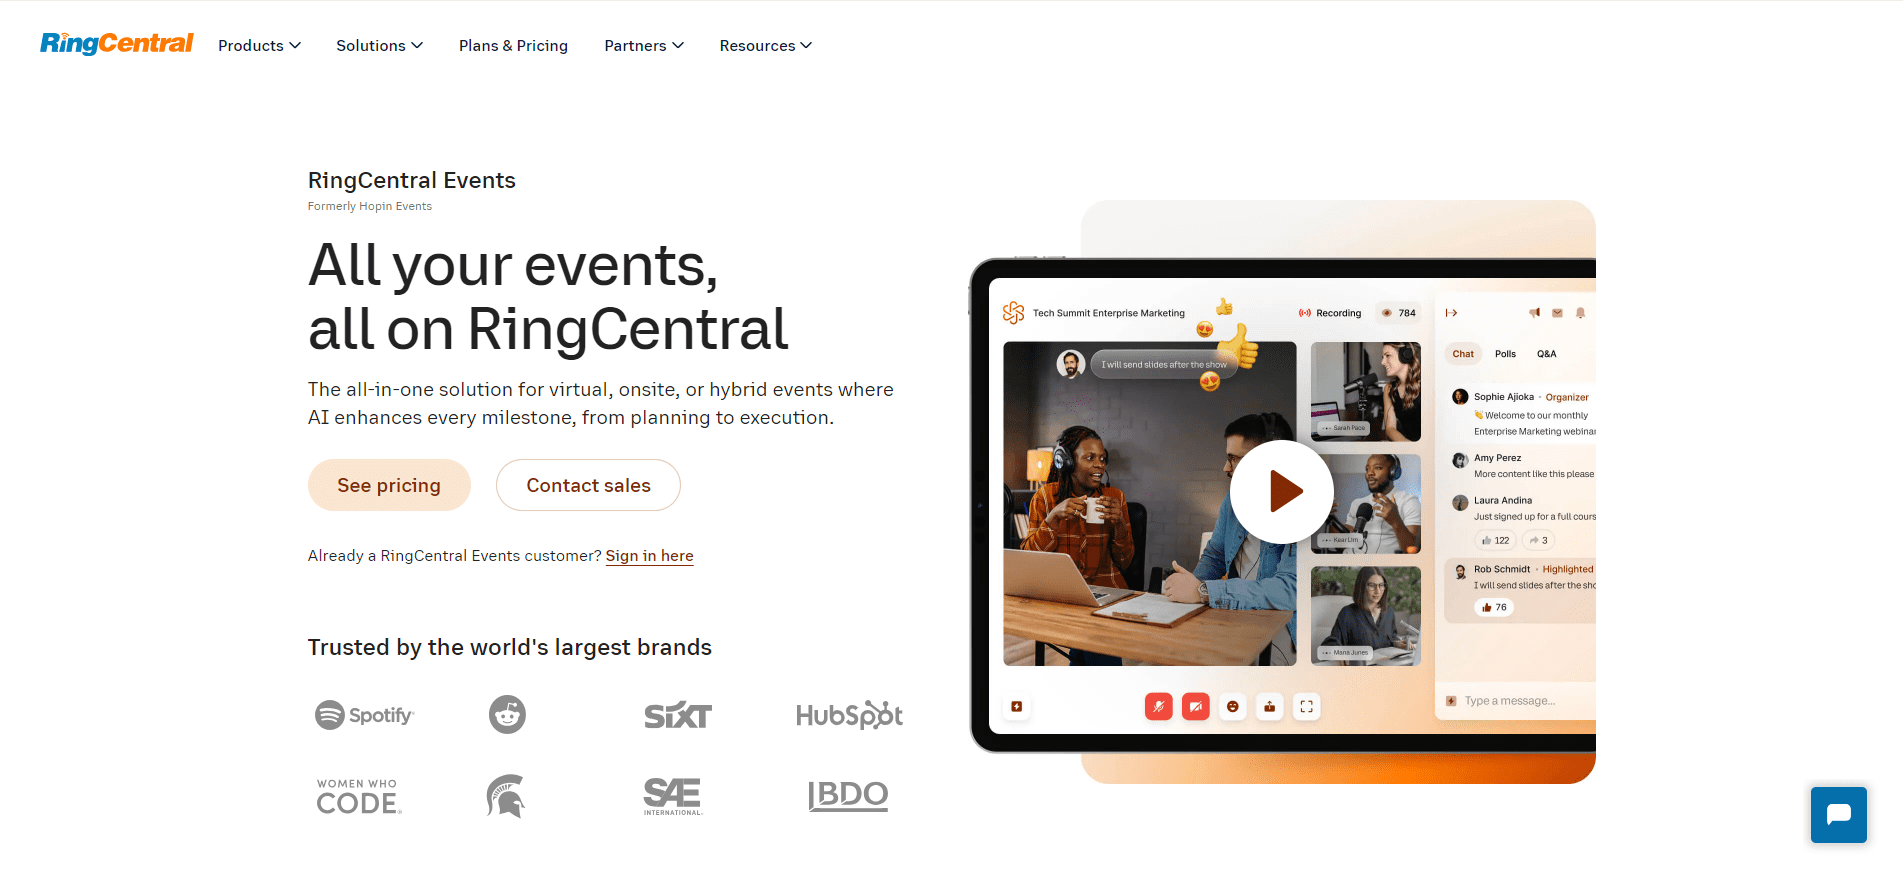 RingCentral's homepage